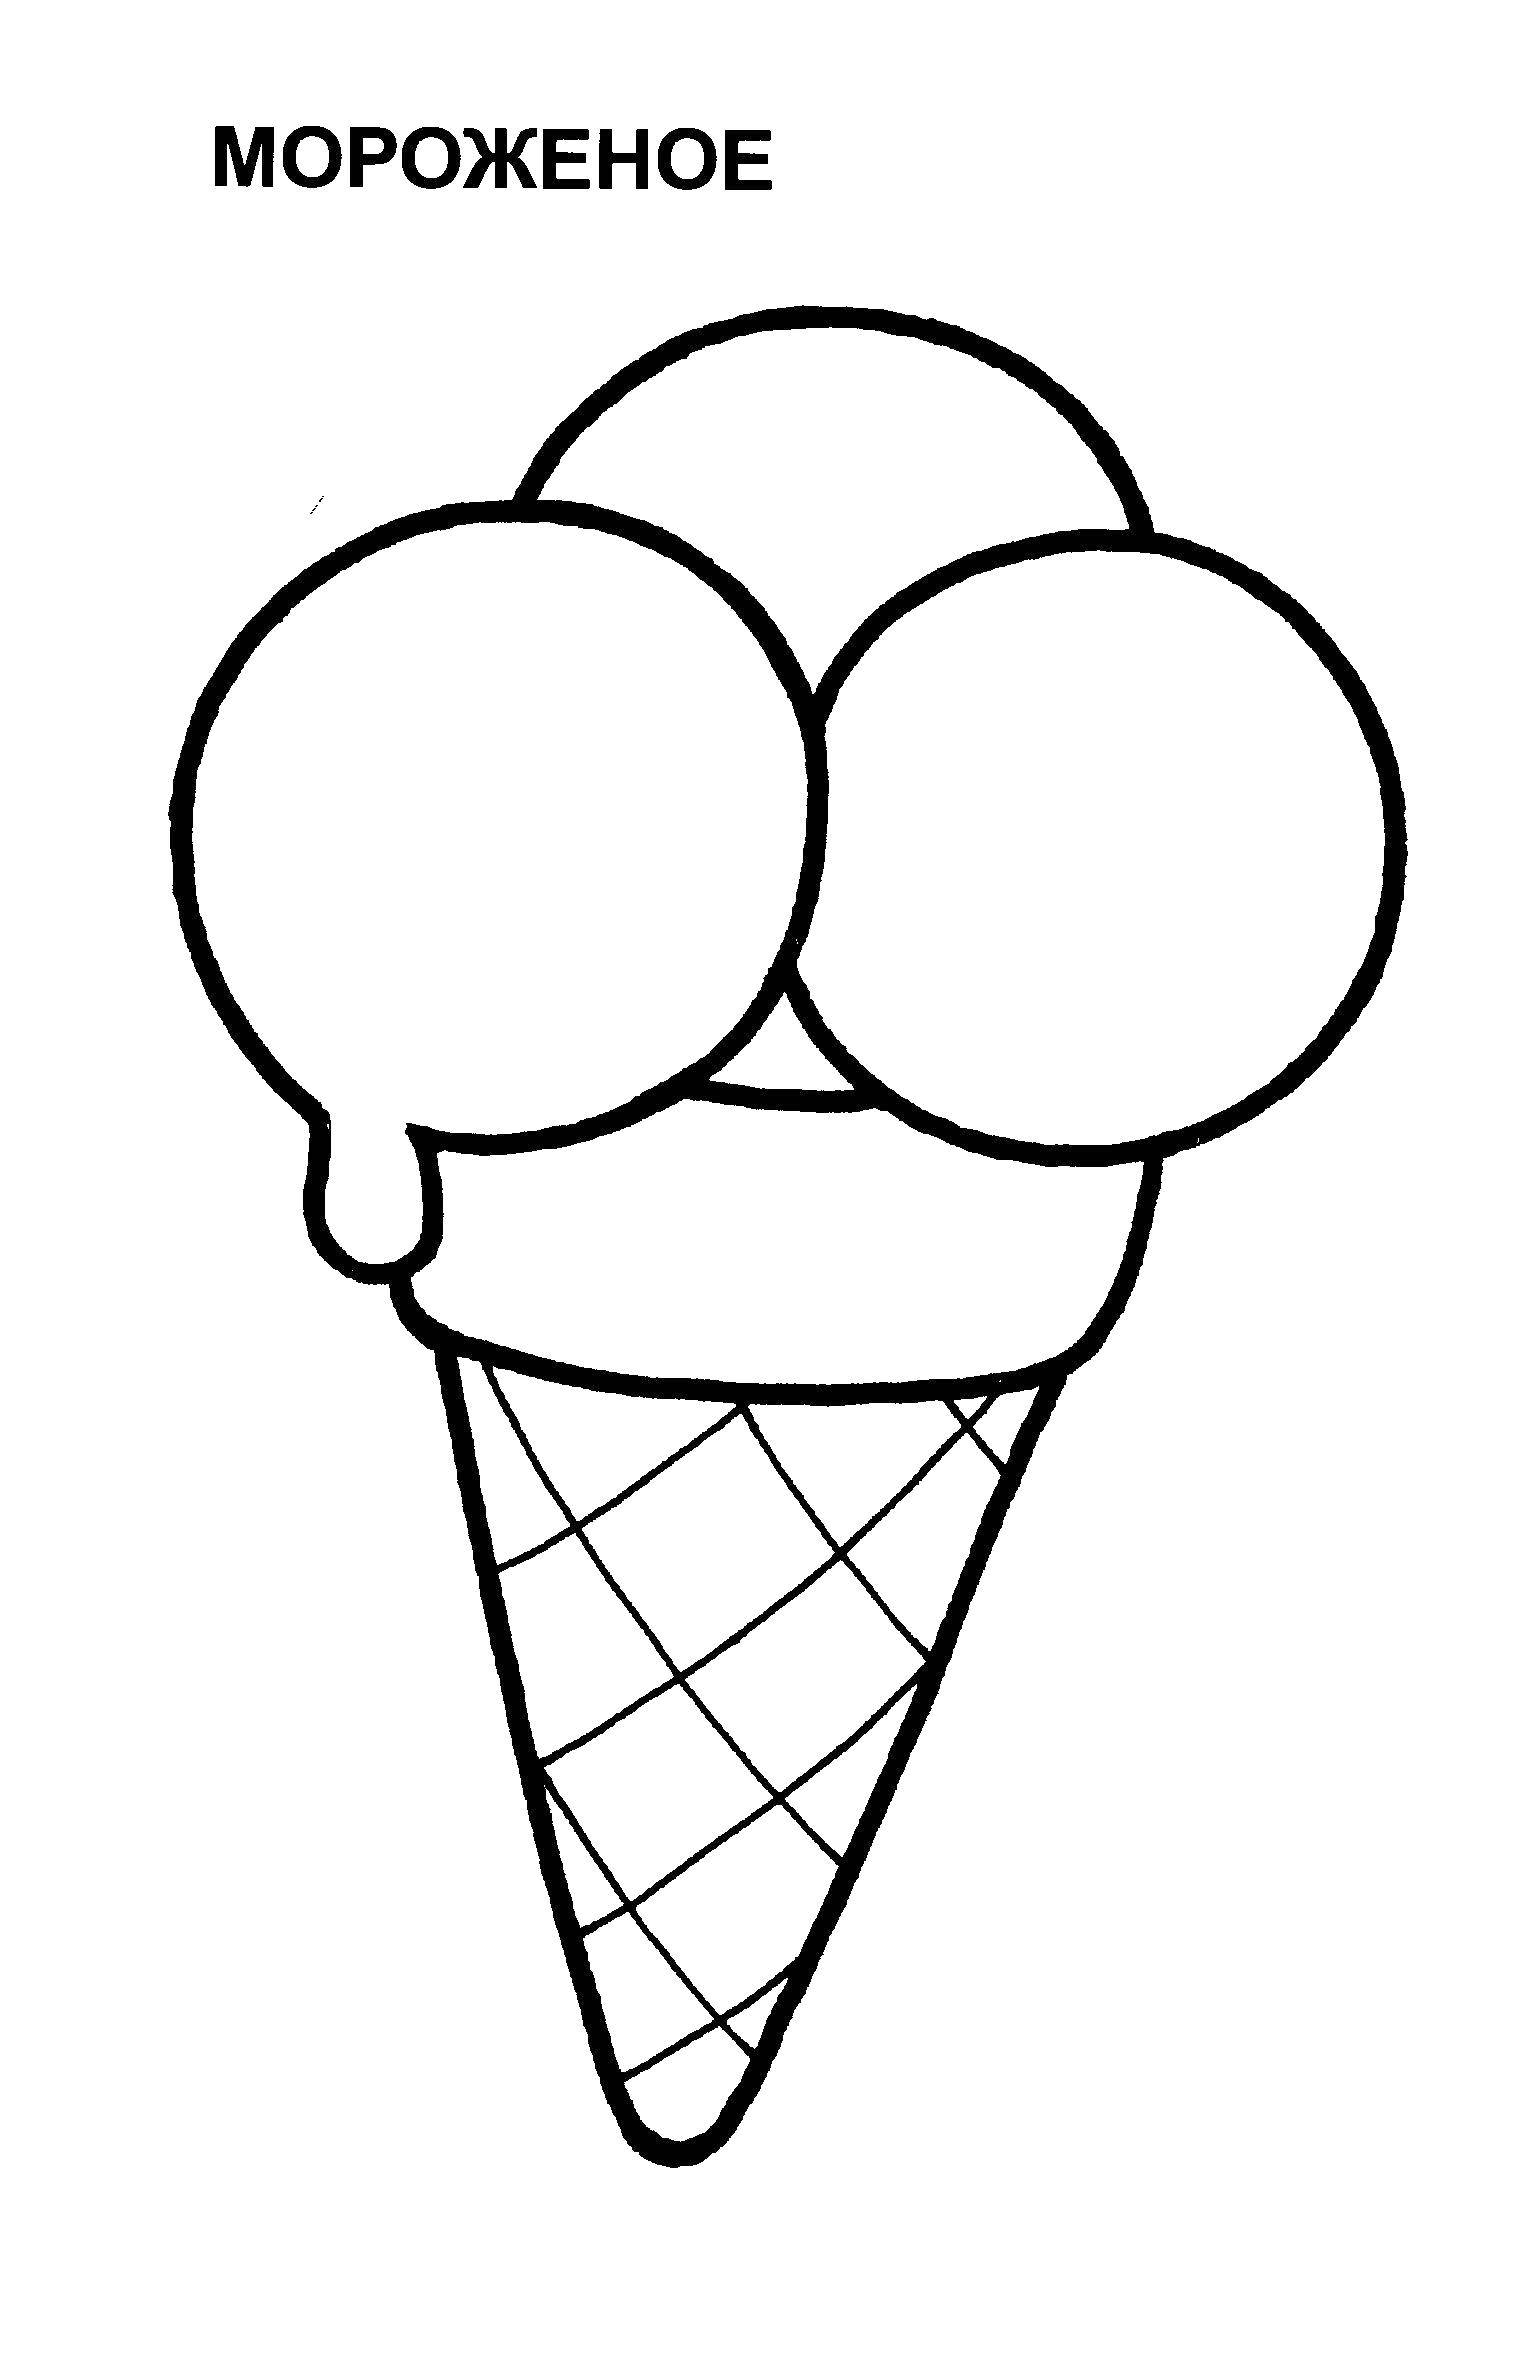 Coloring Ice cream. Category Coloring pages for kids. Tags:  ice cream.